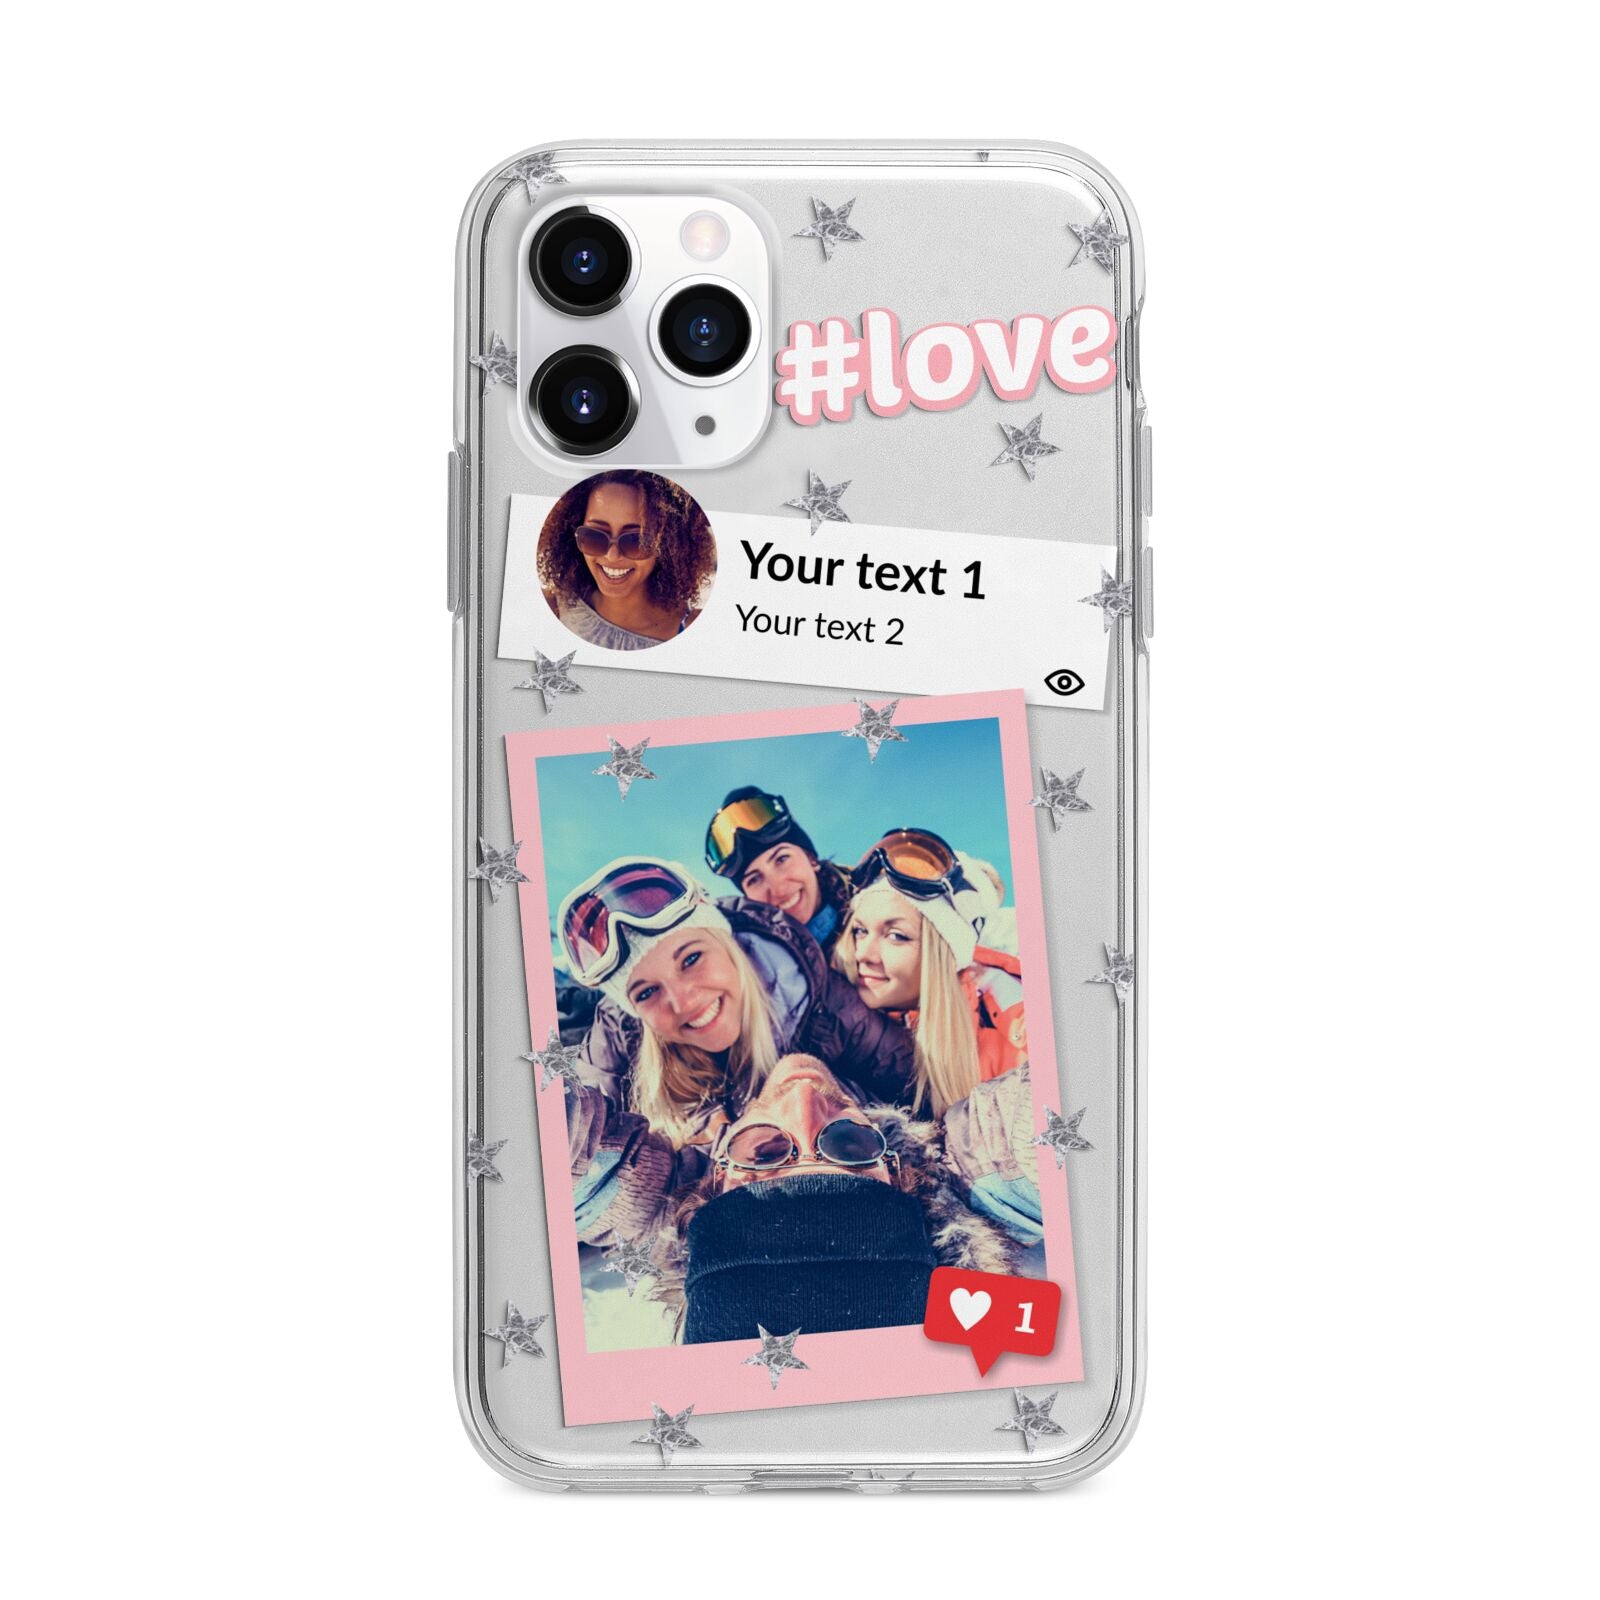 Starry Social Media Photo Montage Upload with Text Apple iPhone 11 Pro in Silver with Bumper Case